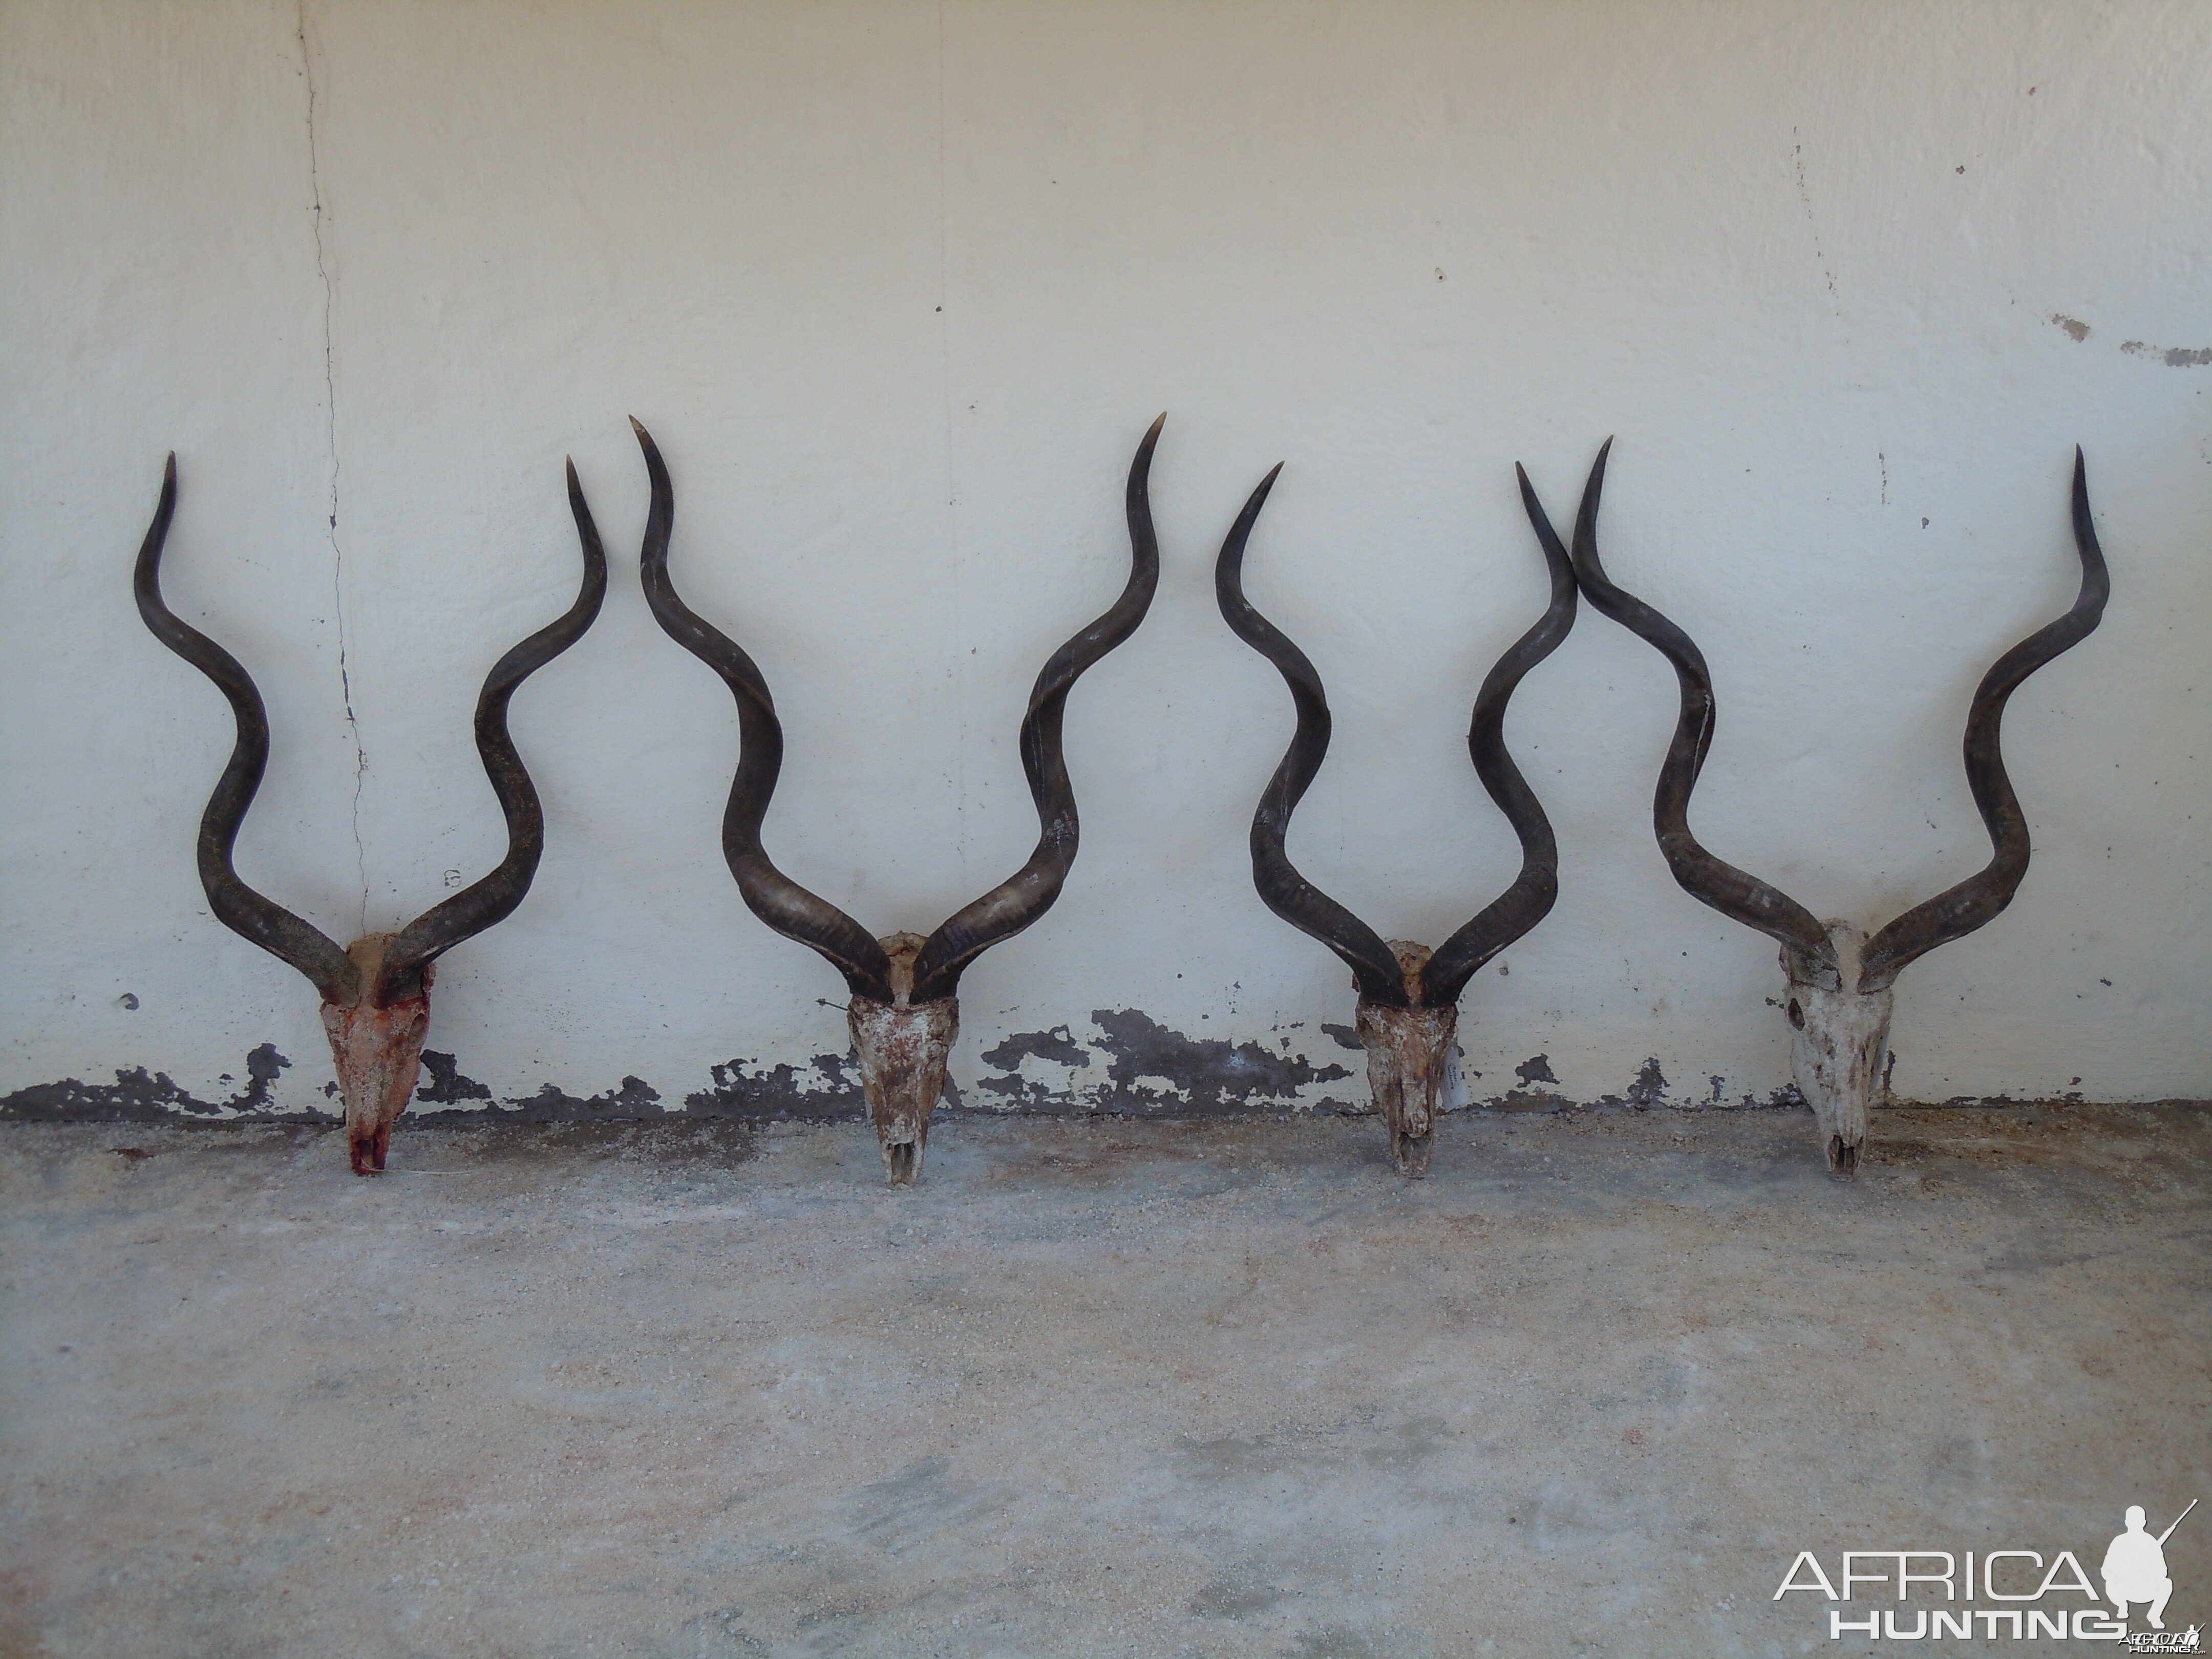 Kudus all within 1/4" of 54 inches